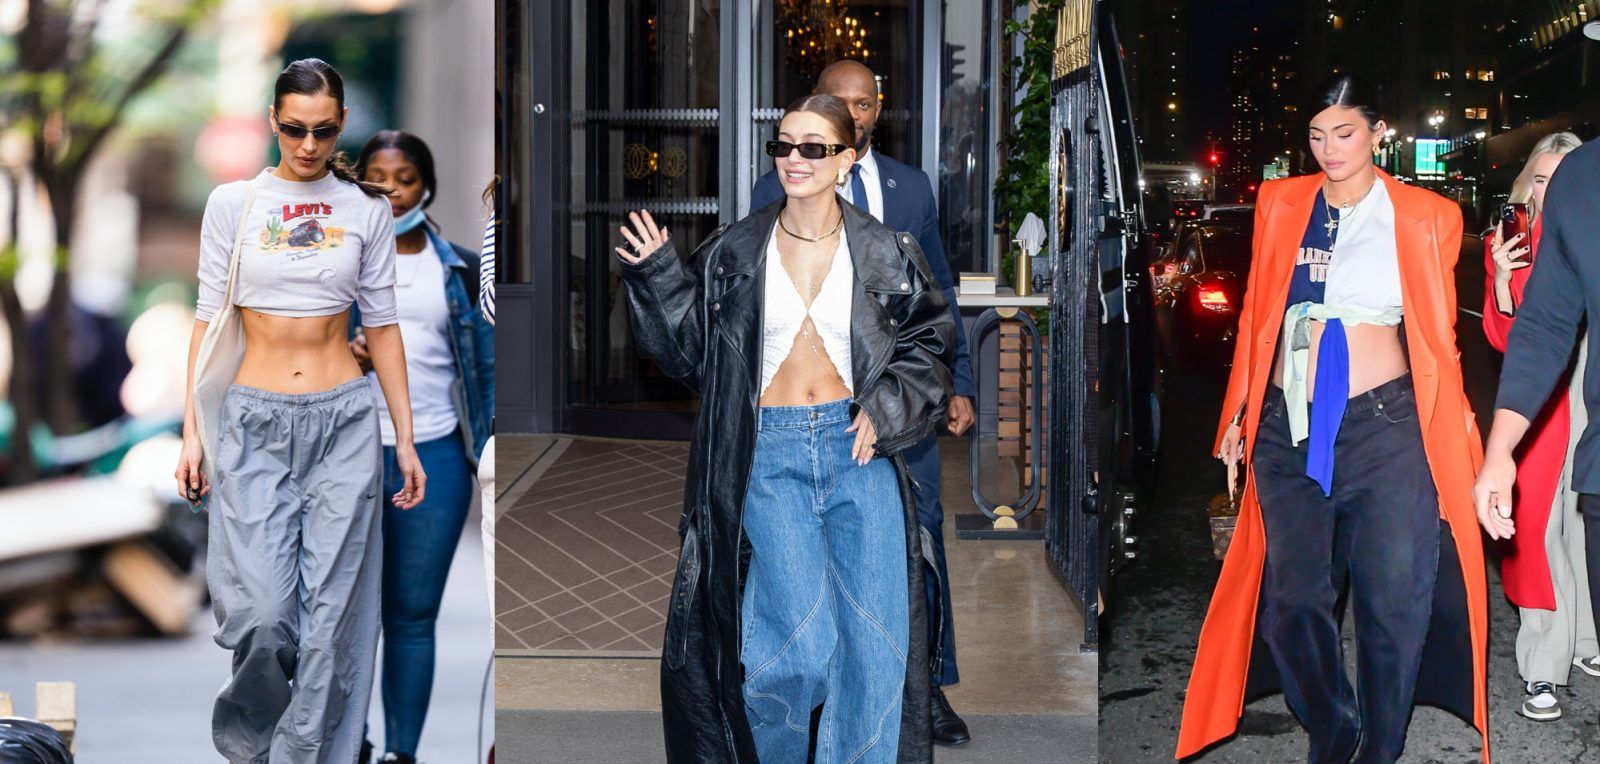 Parachute pants are the latest celeb-approved, Y2K comeback